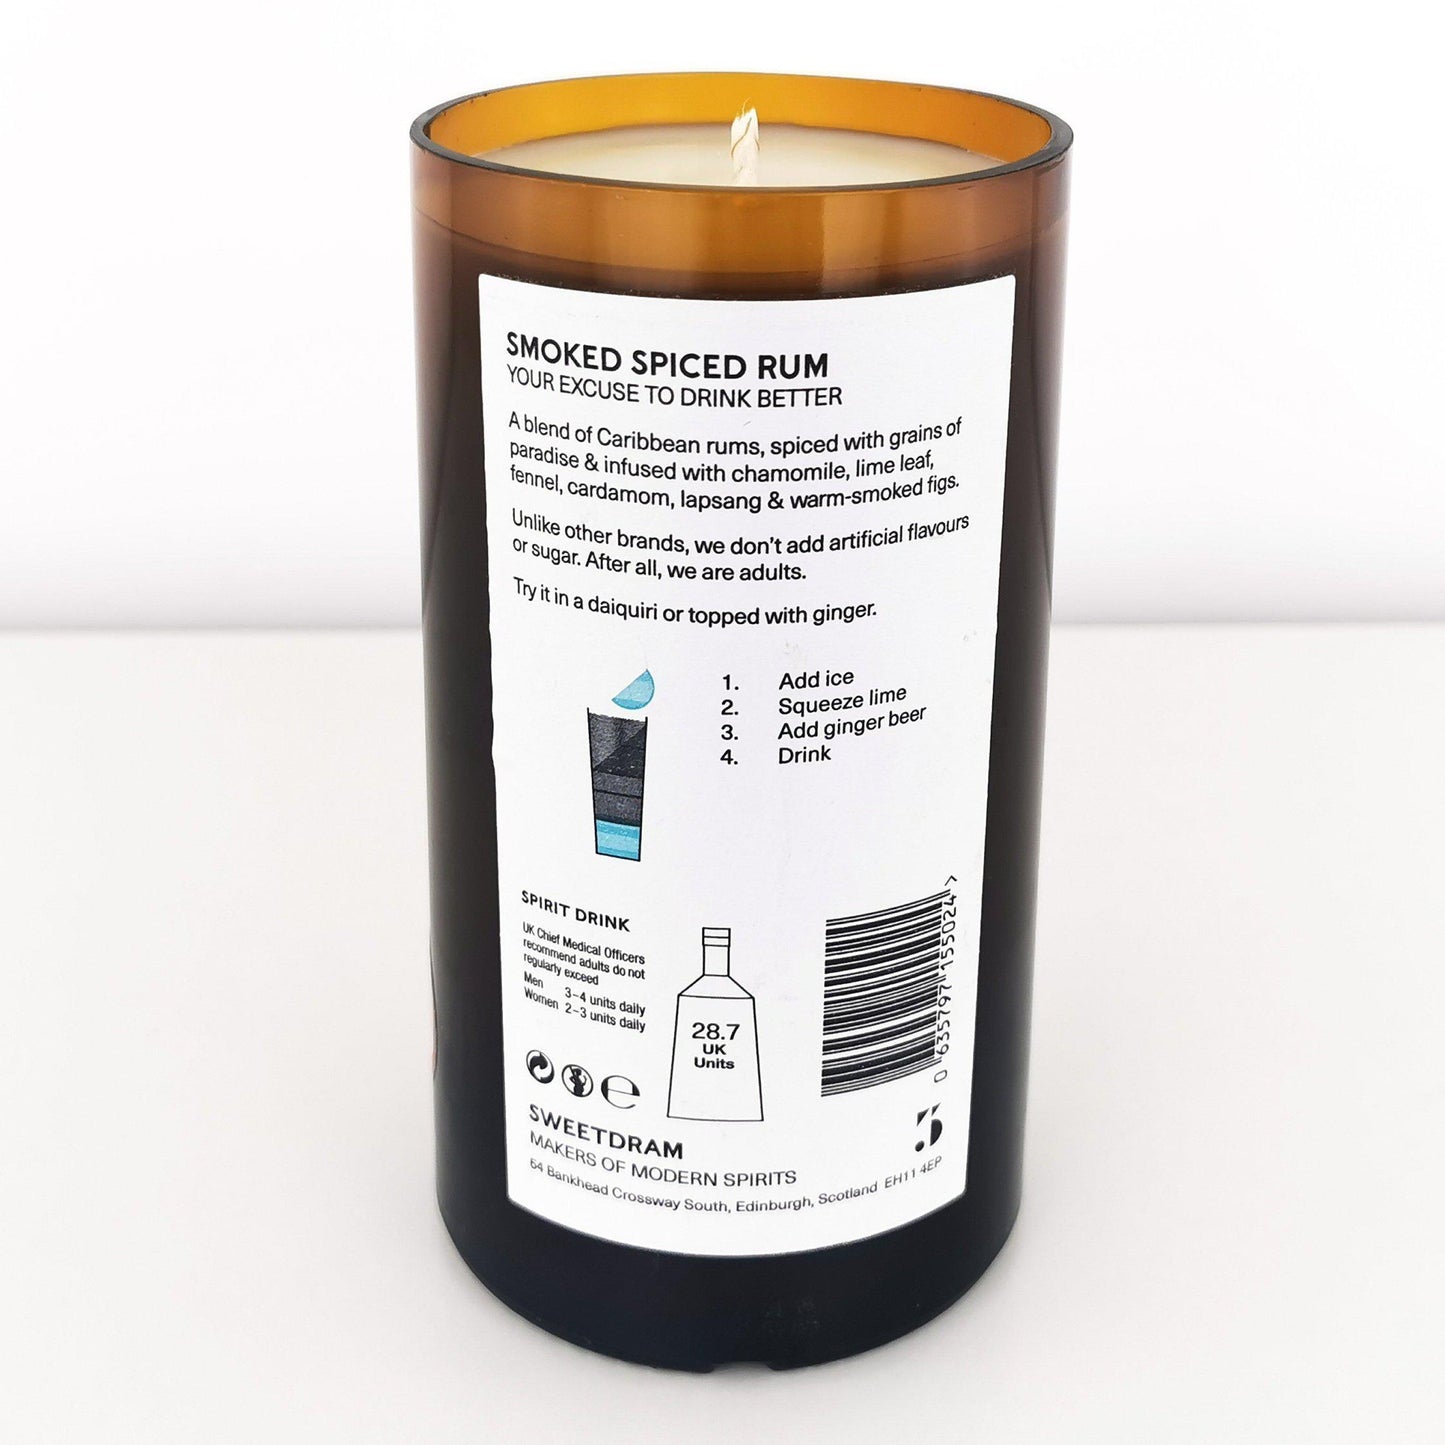 Sweetdram Smoked Spiced Rum Bottle Candle Rum Bottle Candles Adhock Homeware